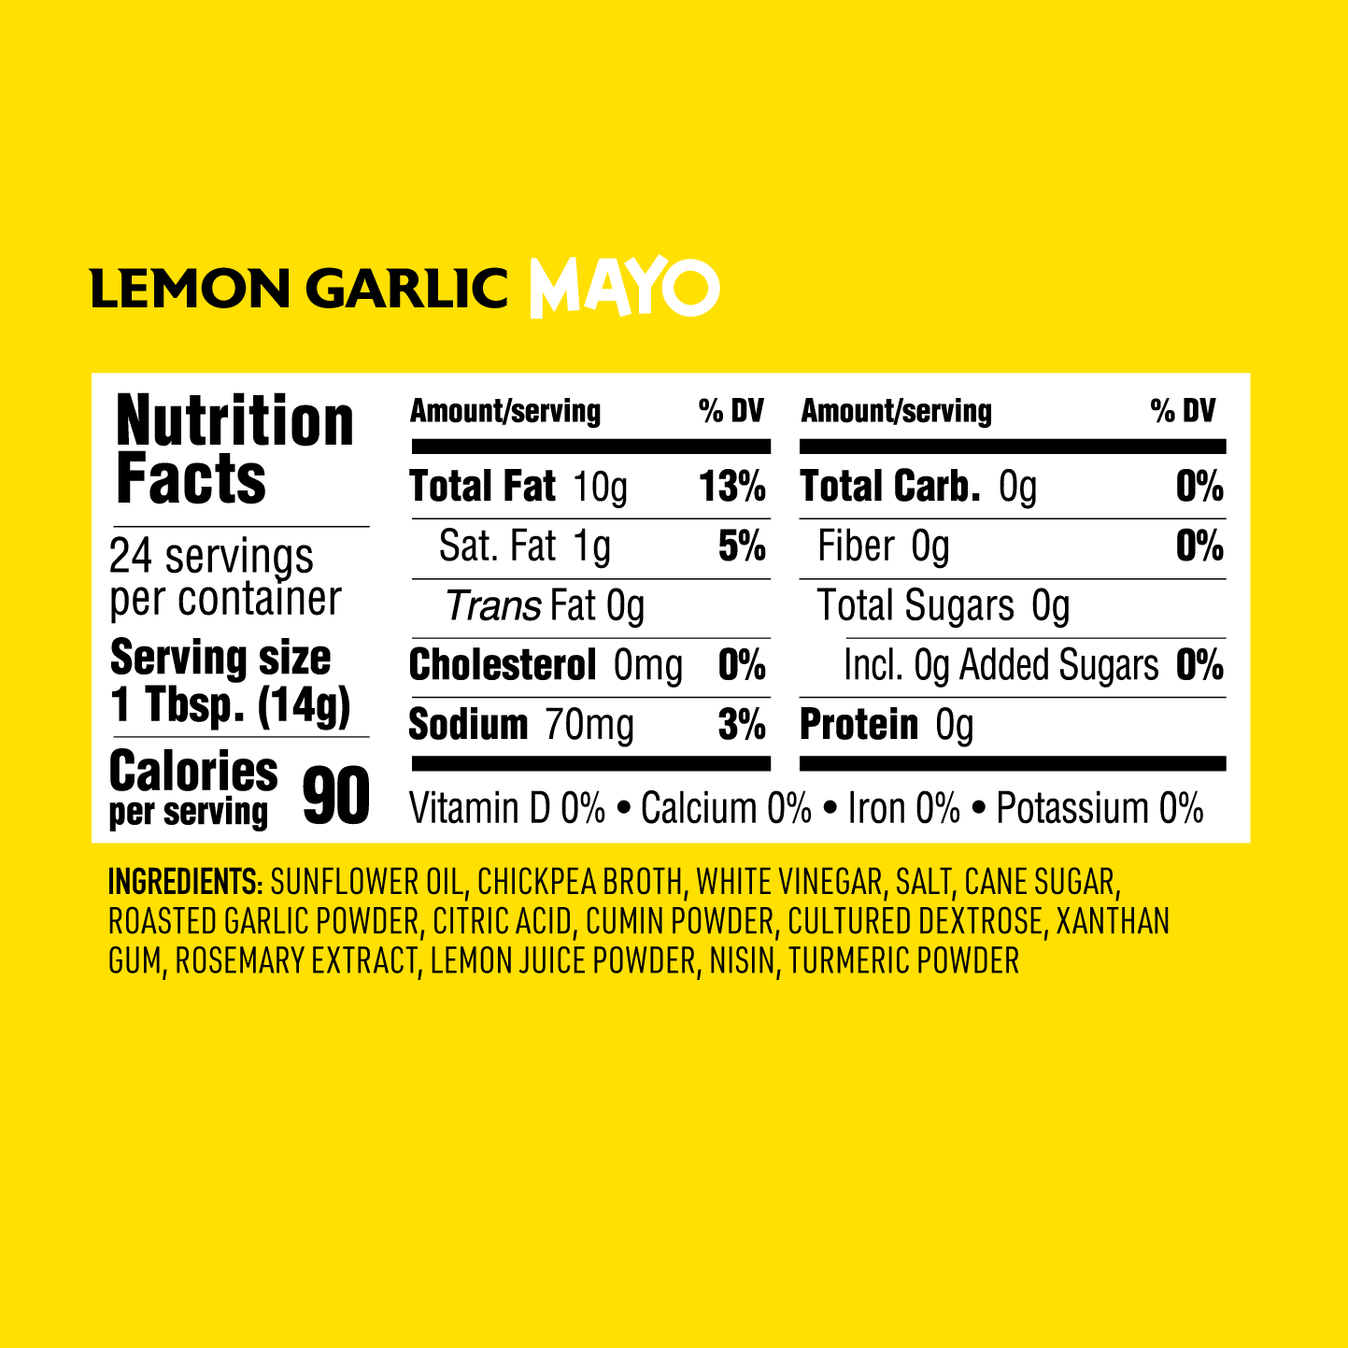 Nutrition facts for O'dang Foods brand Lemon Garlic Vegan Mayo made with chickpeas and sunflower oil. Carb free, cholesterol free, clean label. 